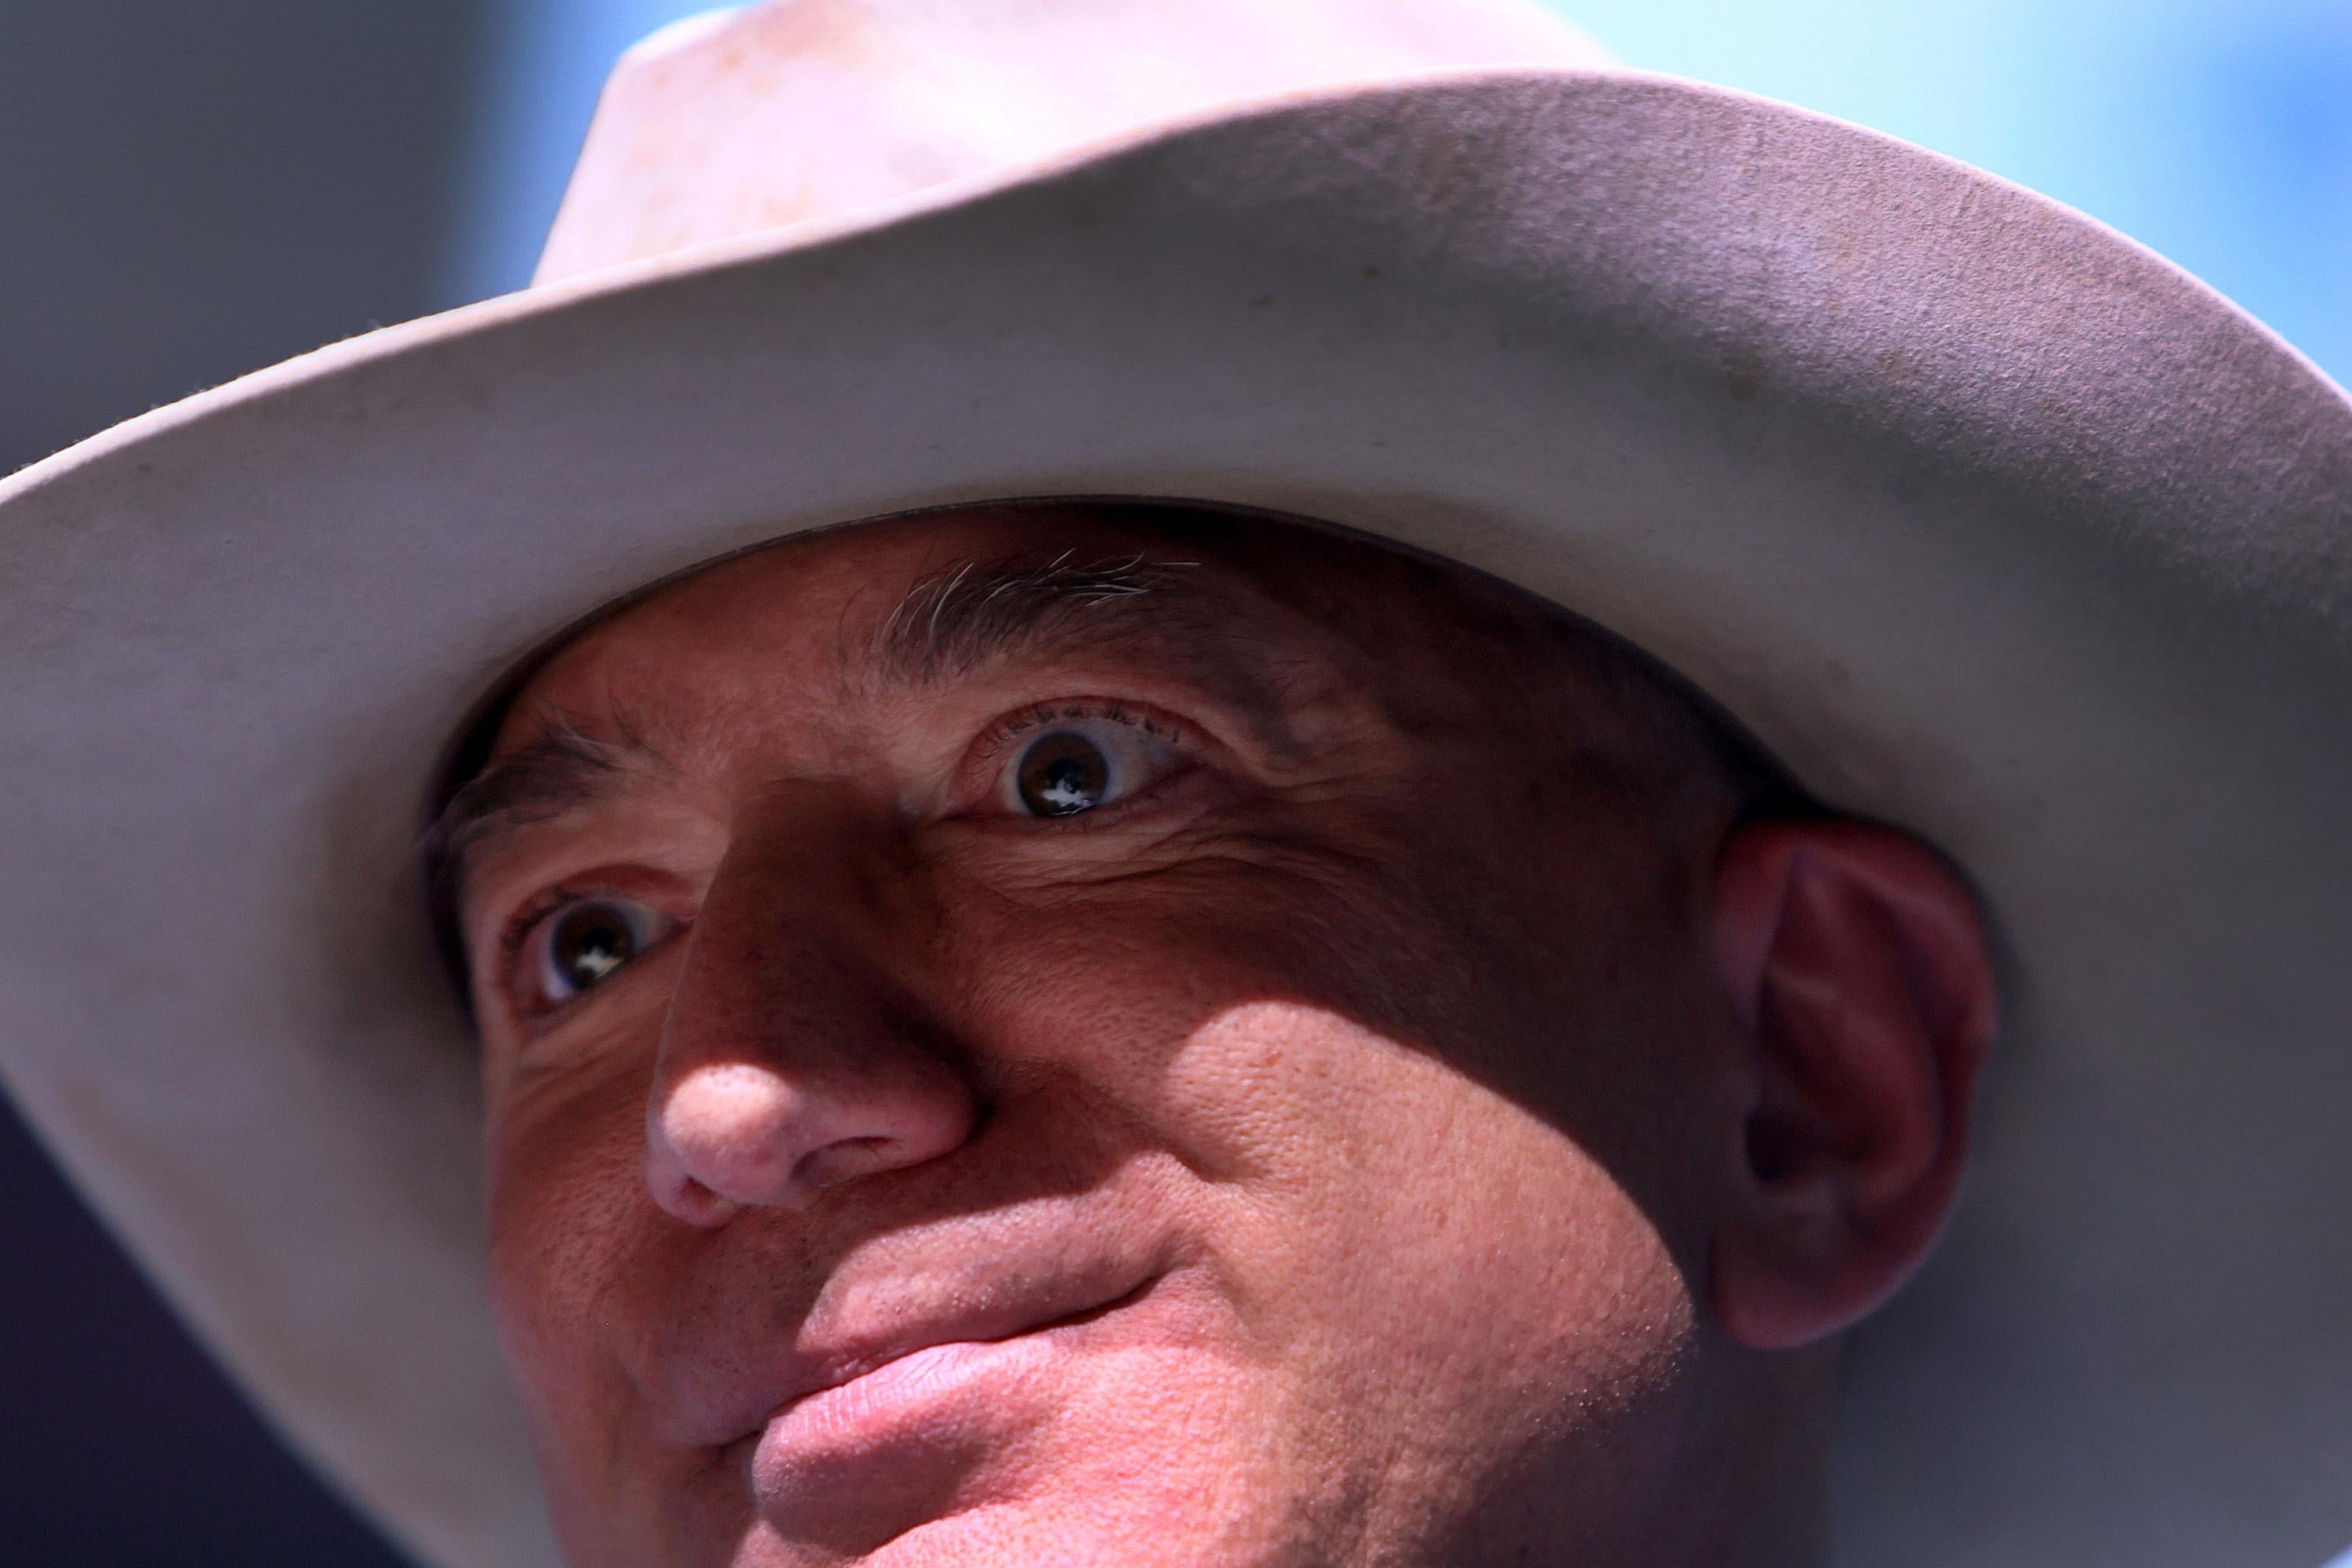 An extreme close-up of Jeff Bezos with his eyes very wide open.